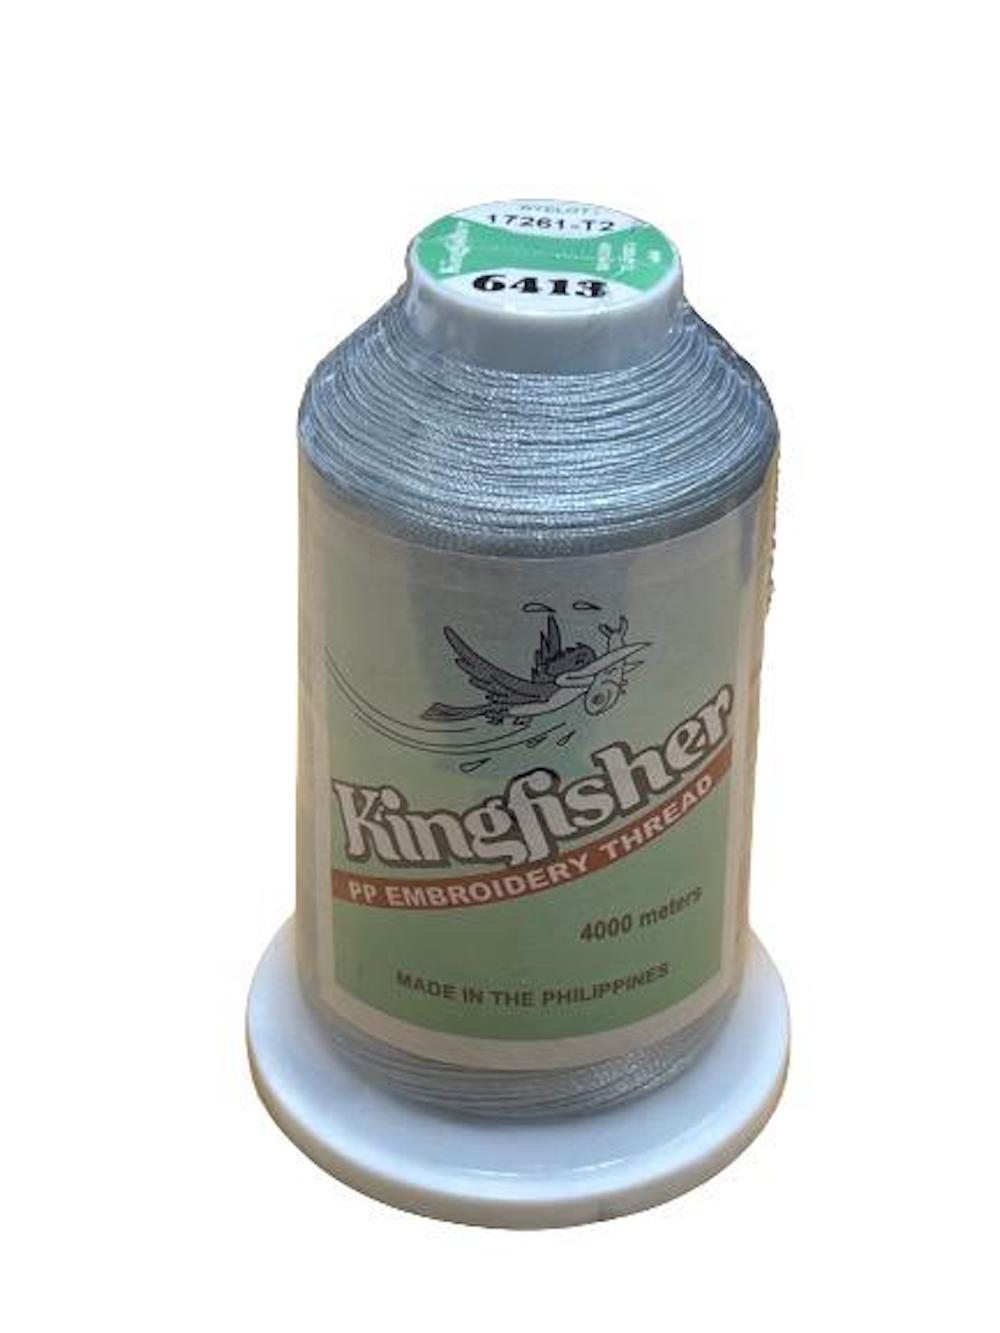 King Fisher Embroidery Thread 4000m 6413 - MY SEWING MALL